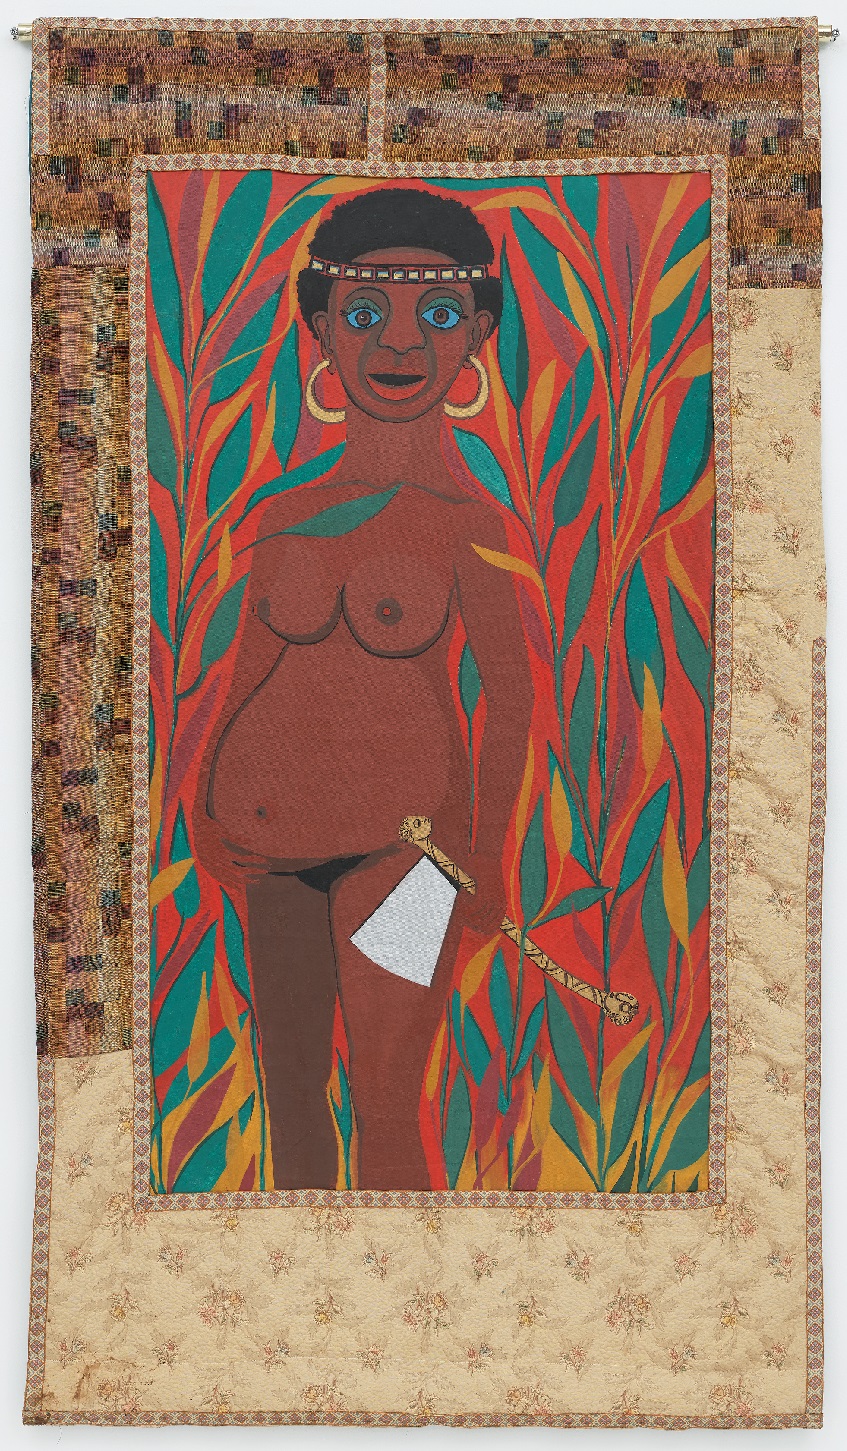 Faith Ringgold, Slave Rape #3: Fight to Save Your Life, 1972,  Huile sur toile et tissus, 233,7 × 129,2 cm, Glenstone Museum, Potomac, Maryland. © Faith Ringgold / ARS, NY  and DACS, London, courtesy ACA Galleries, New York 2022. Photo: Tom  Powel Imaging; courtesy Pippy Houlds-worth Gallery, London.